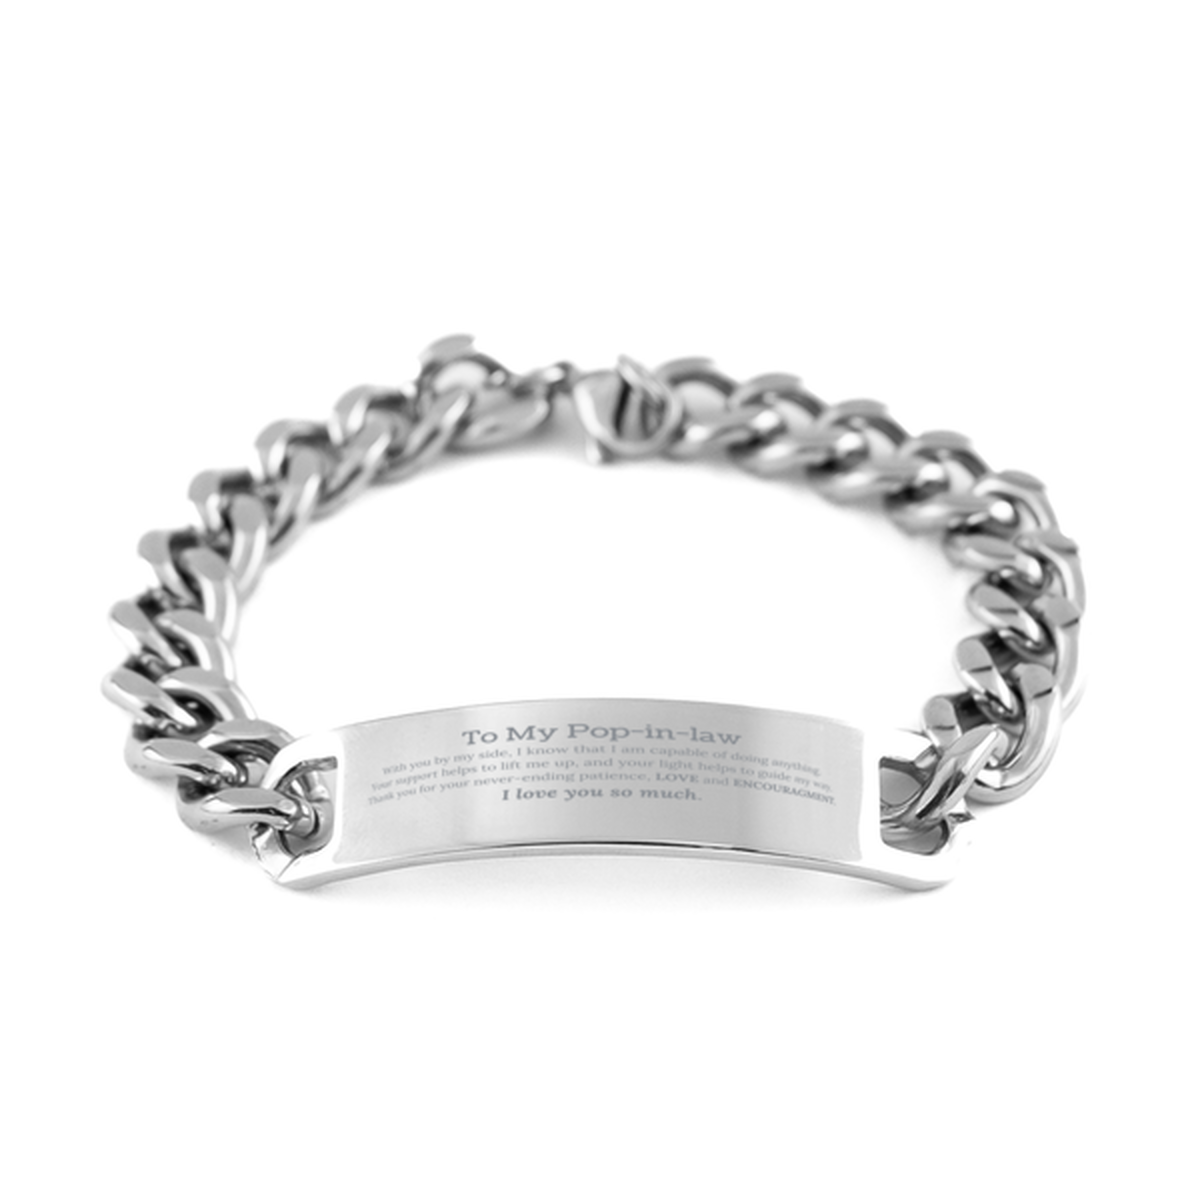 Appreciation Pop-in-law Cuban Chain Stainless Steel Bracelet Gifts, To My Pop-in-law Birthday Christmas Wedding Keepsake Gifts for Pop-in-law With you by my side, I know that I am capable of doing anything. I love you so much